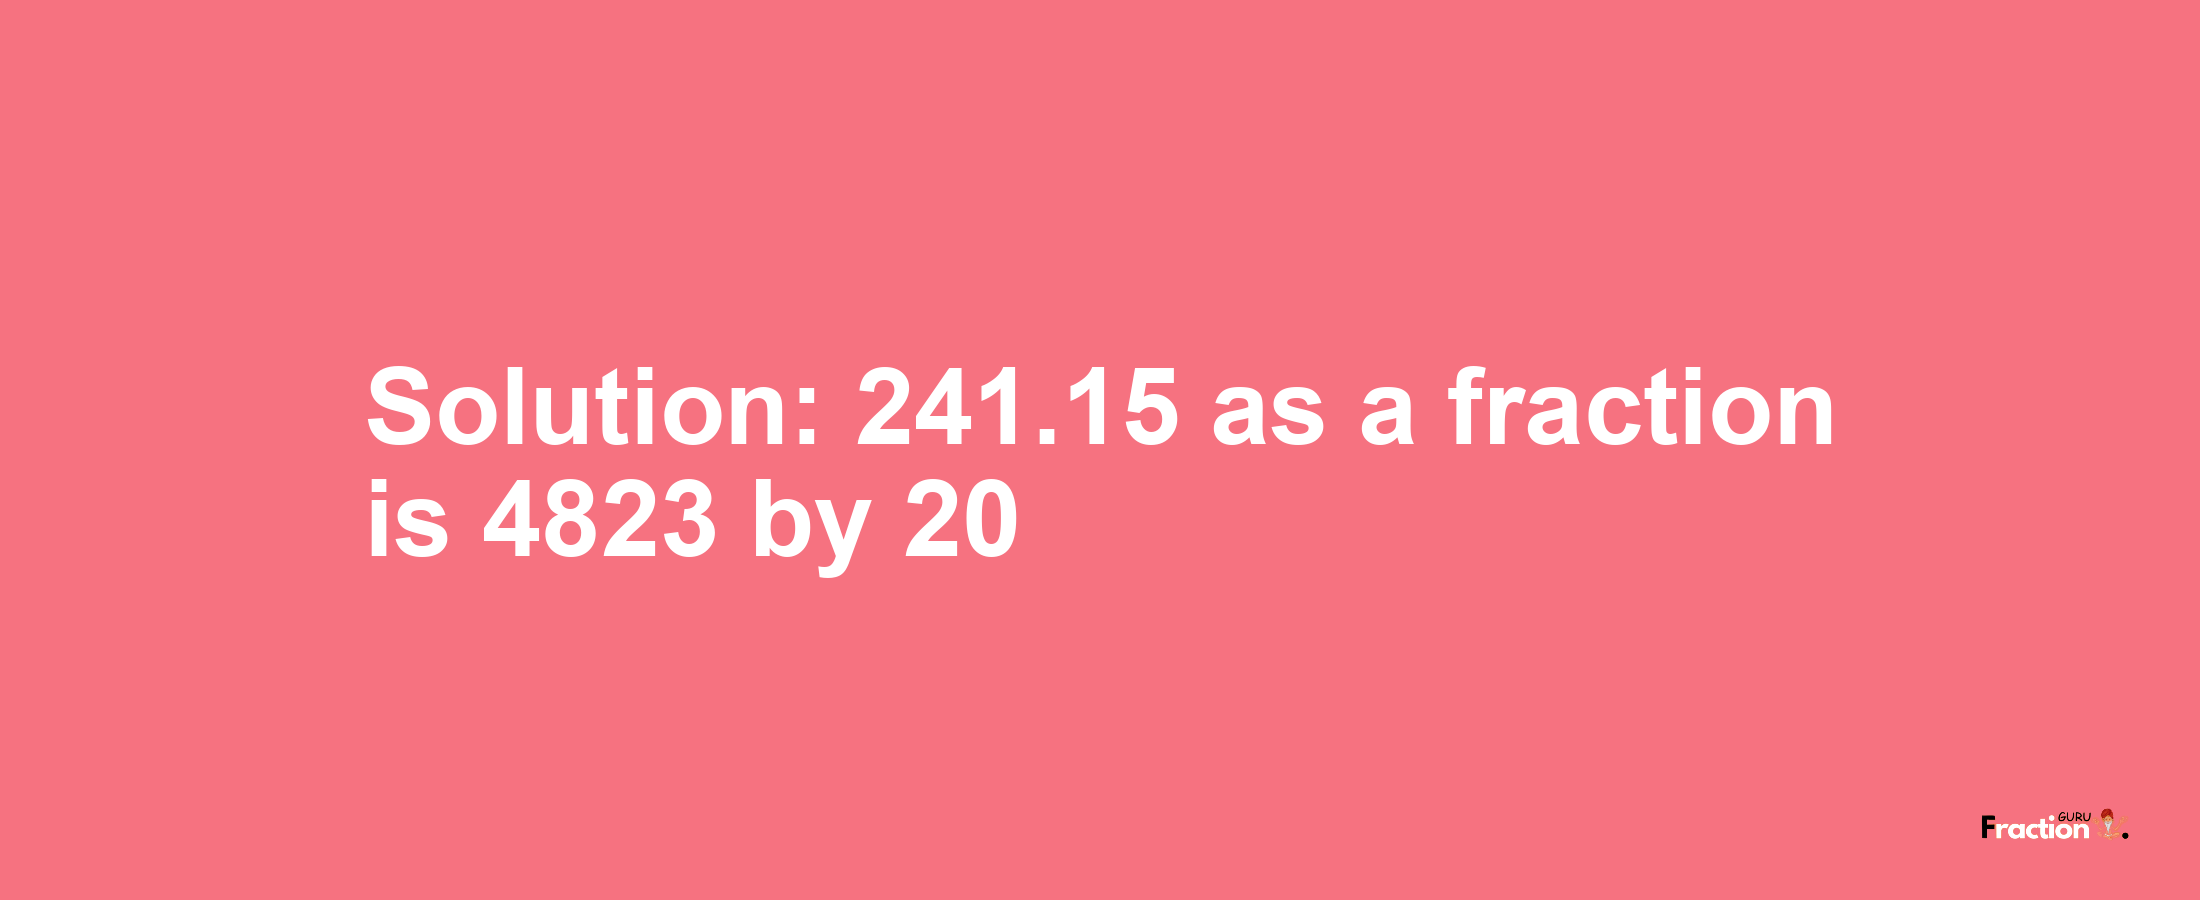 Solution:241.15 as a fraction is 4823/20